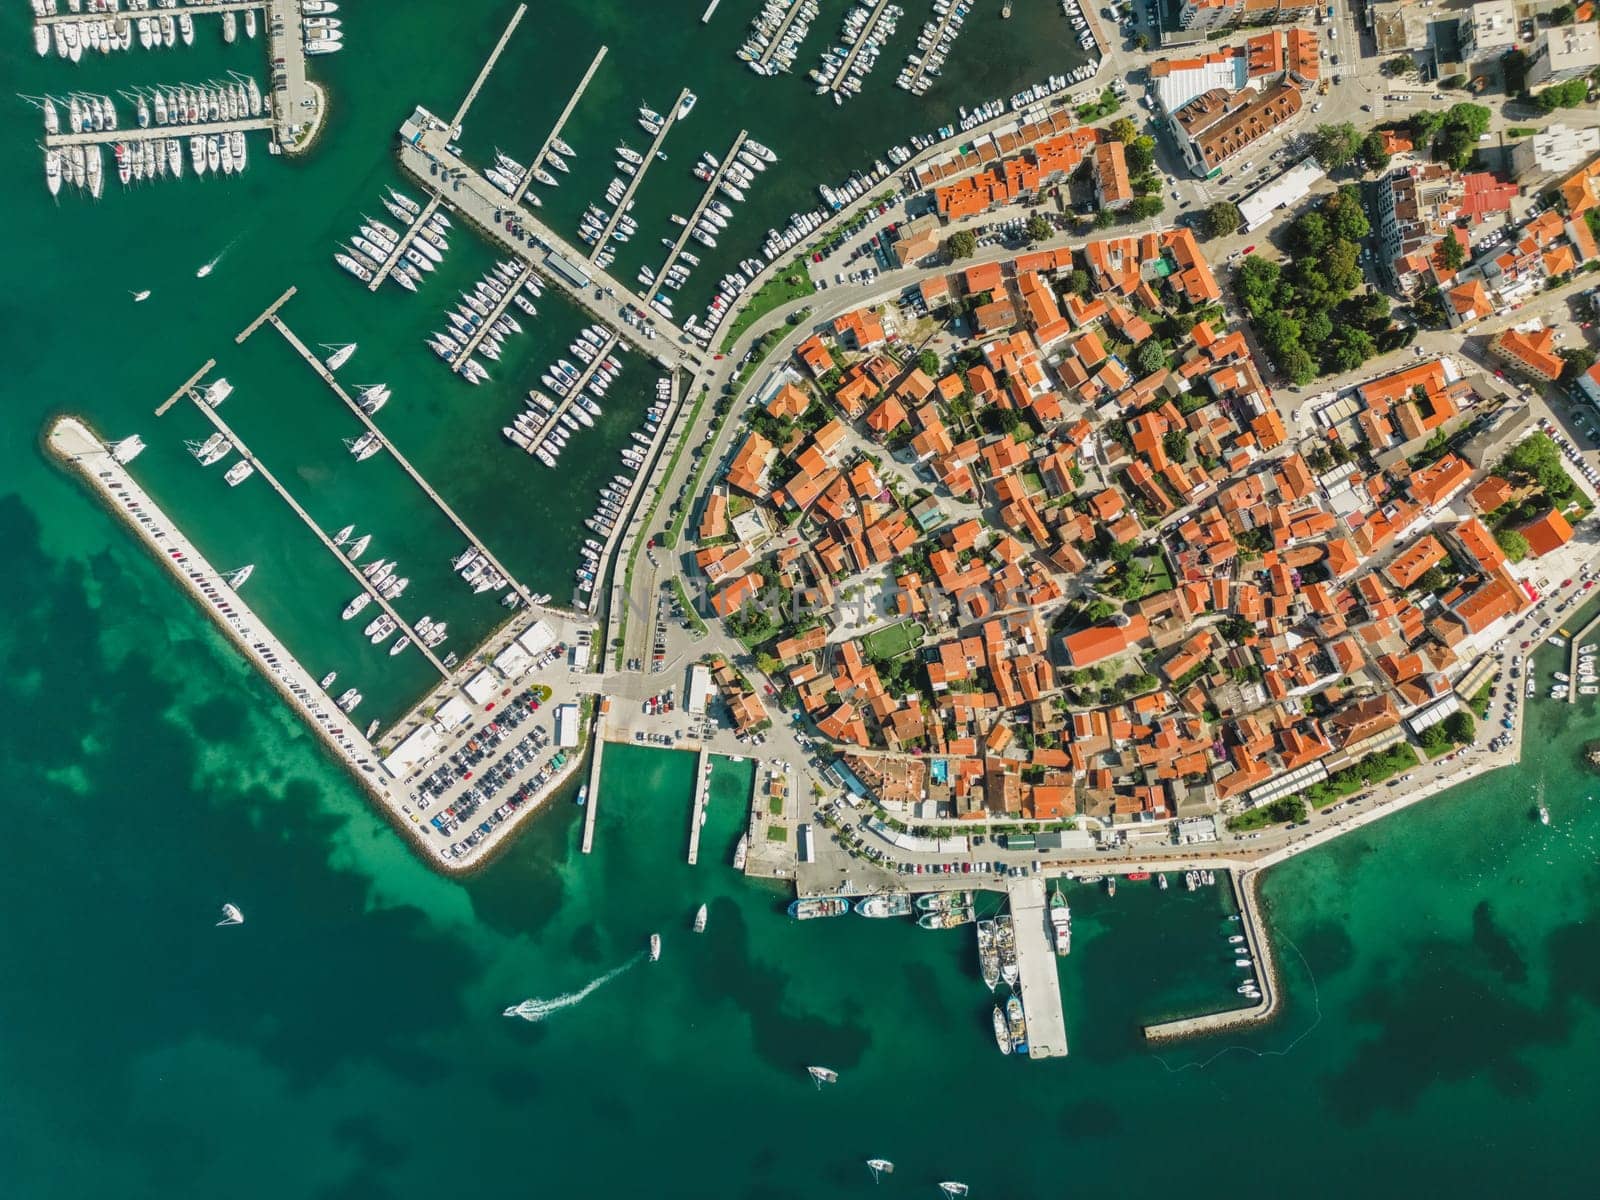 Biograd na Moru, aerial above marina view with ships and yachts at pier in row. Old European architecture in summer port, travel destination on Adriatic Sea coast, Dalmatia region of Croatia